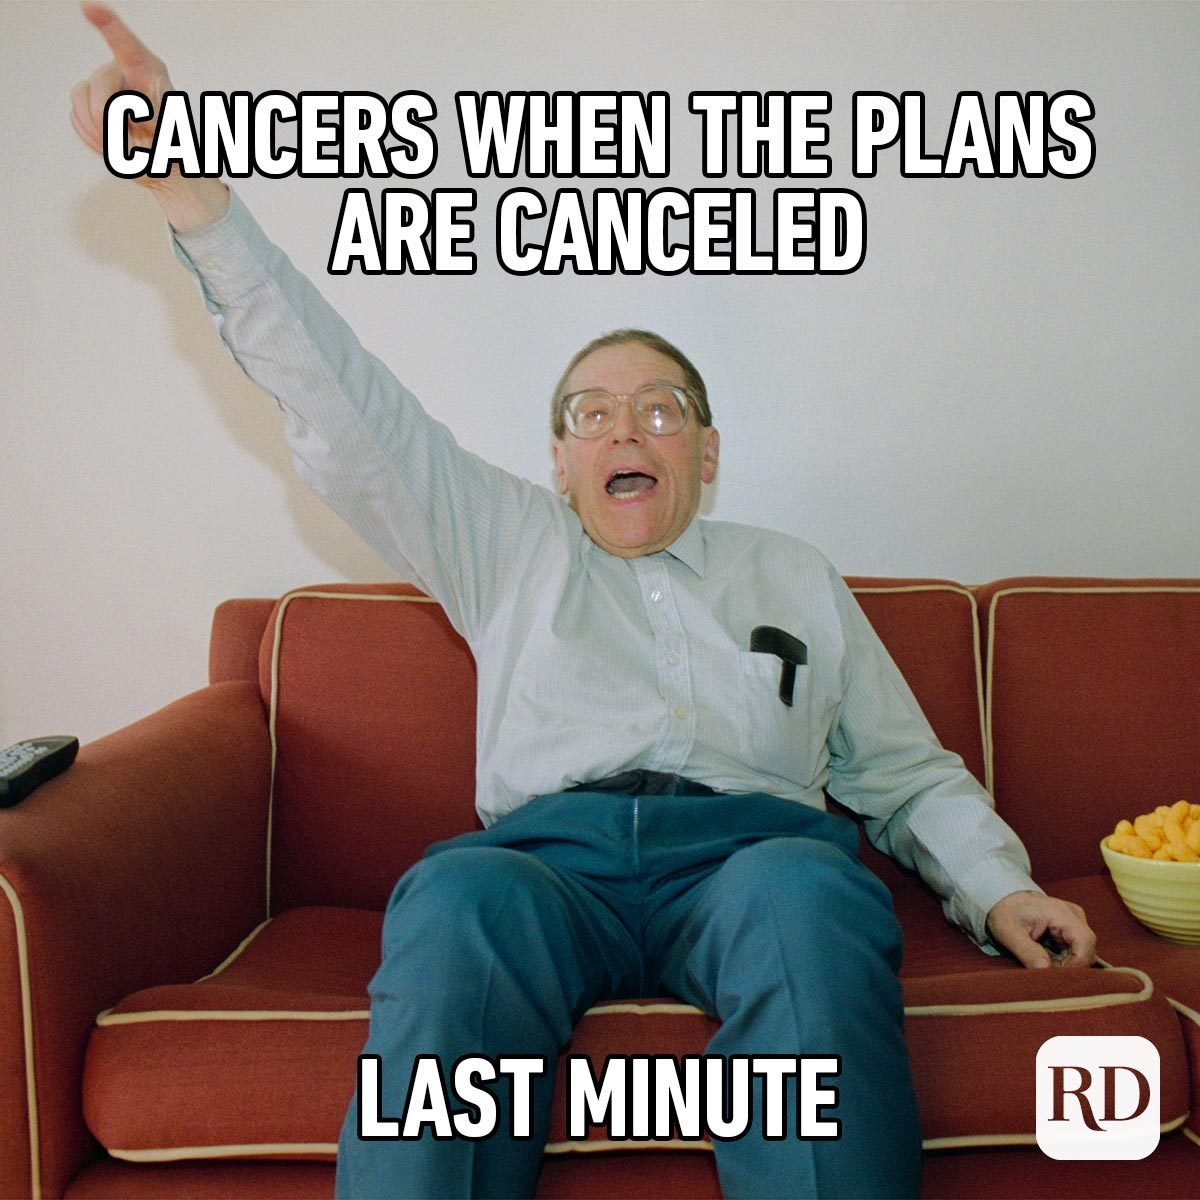 Hilarious Zodiac Memes That'll Crack You Up cancers when plans are canceled last minute old uncle sitting cheering